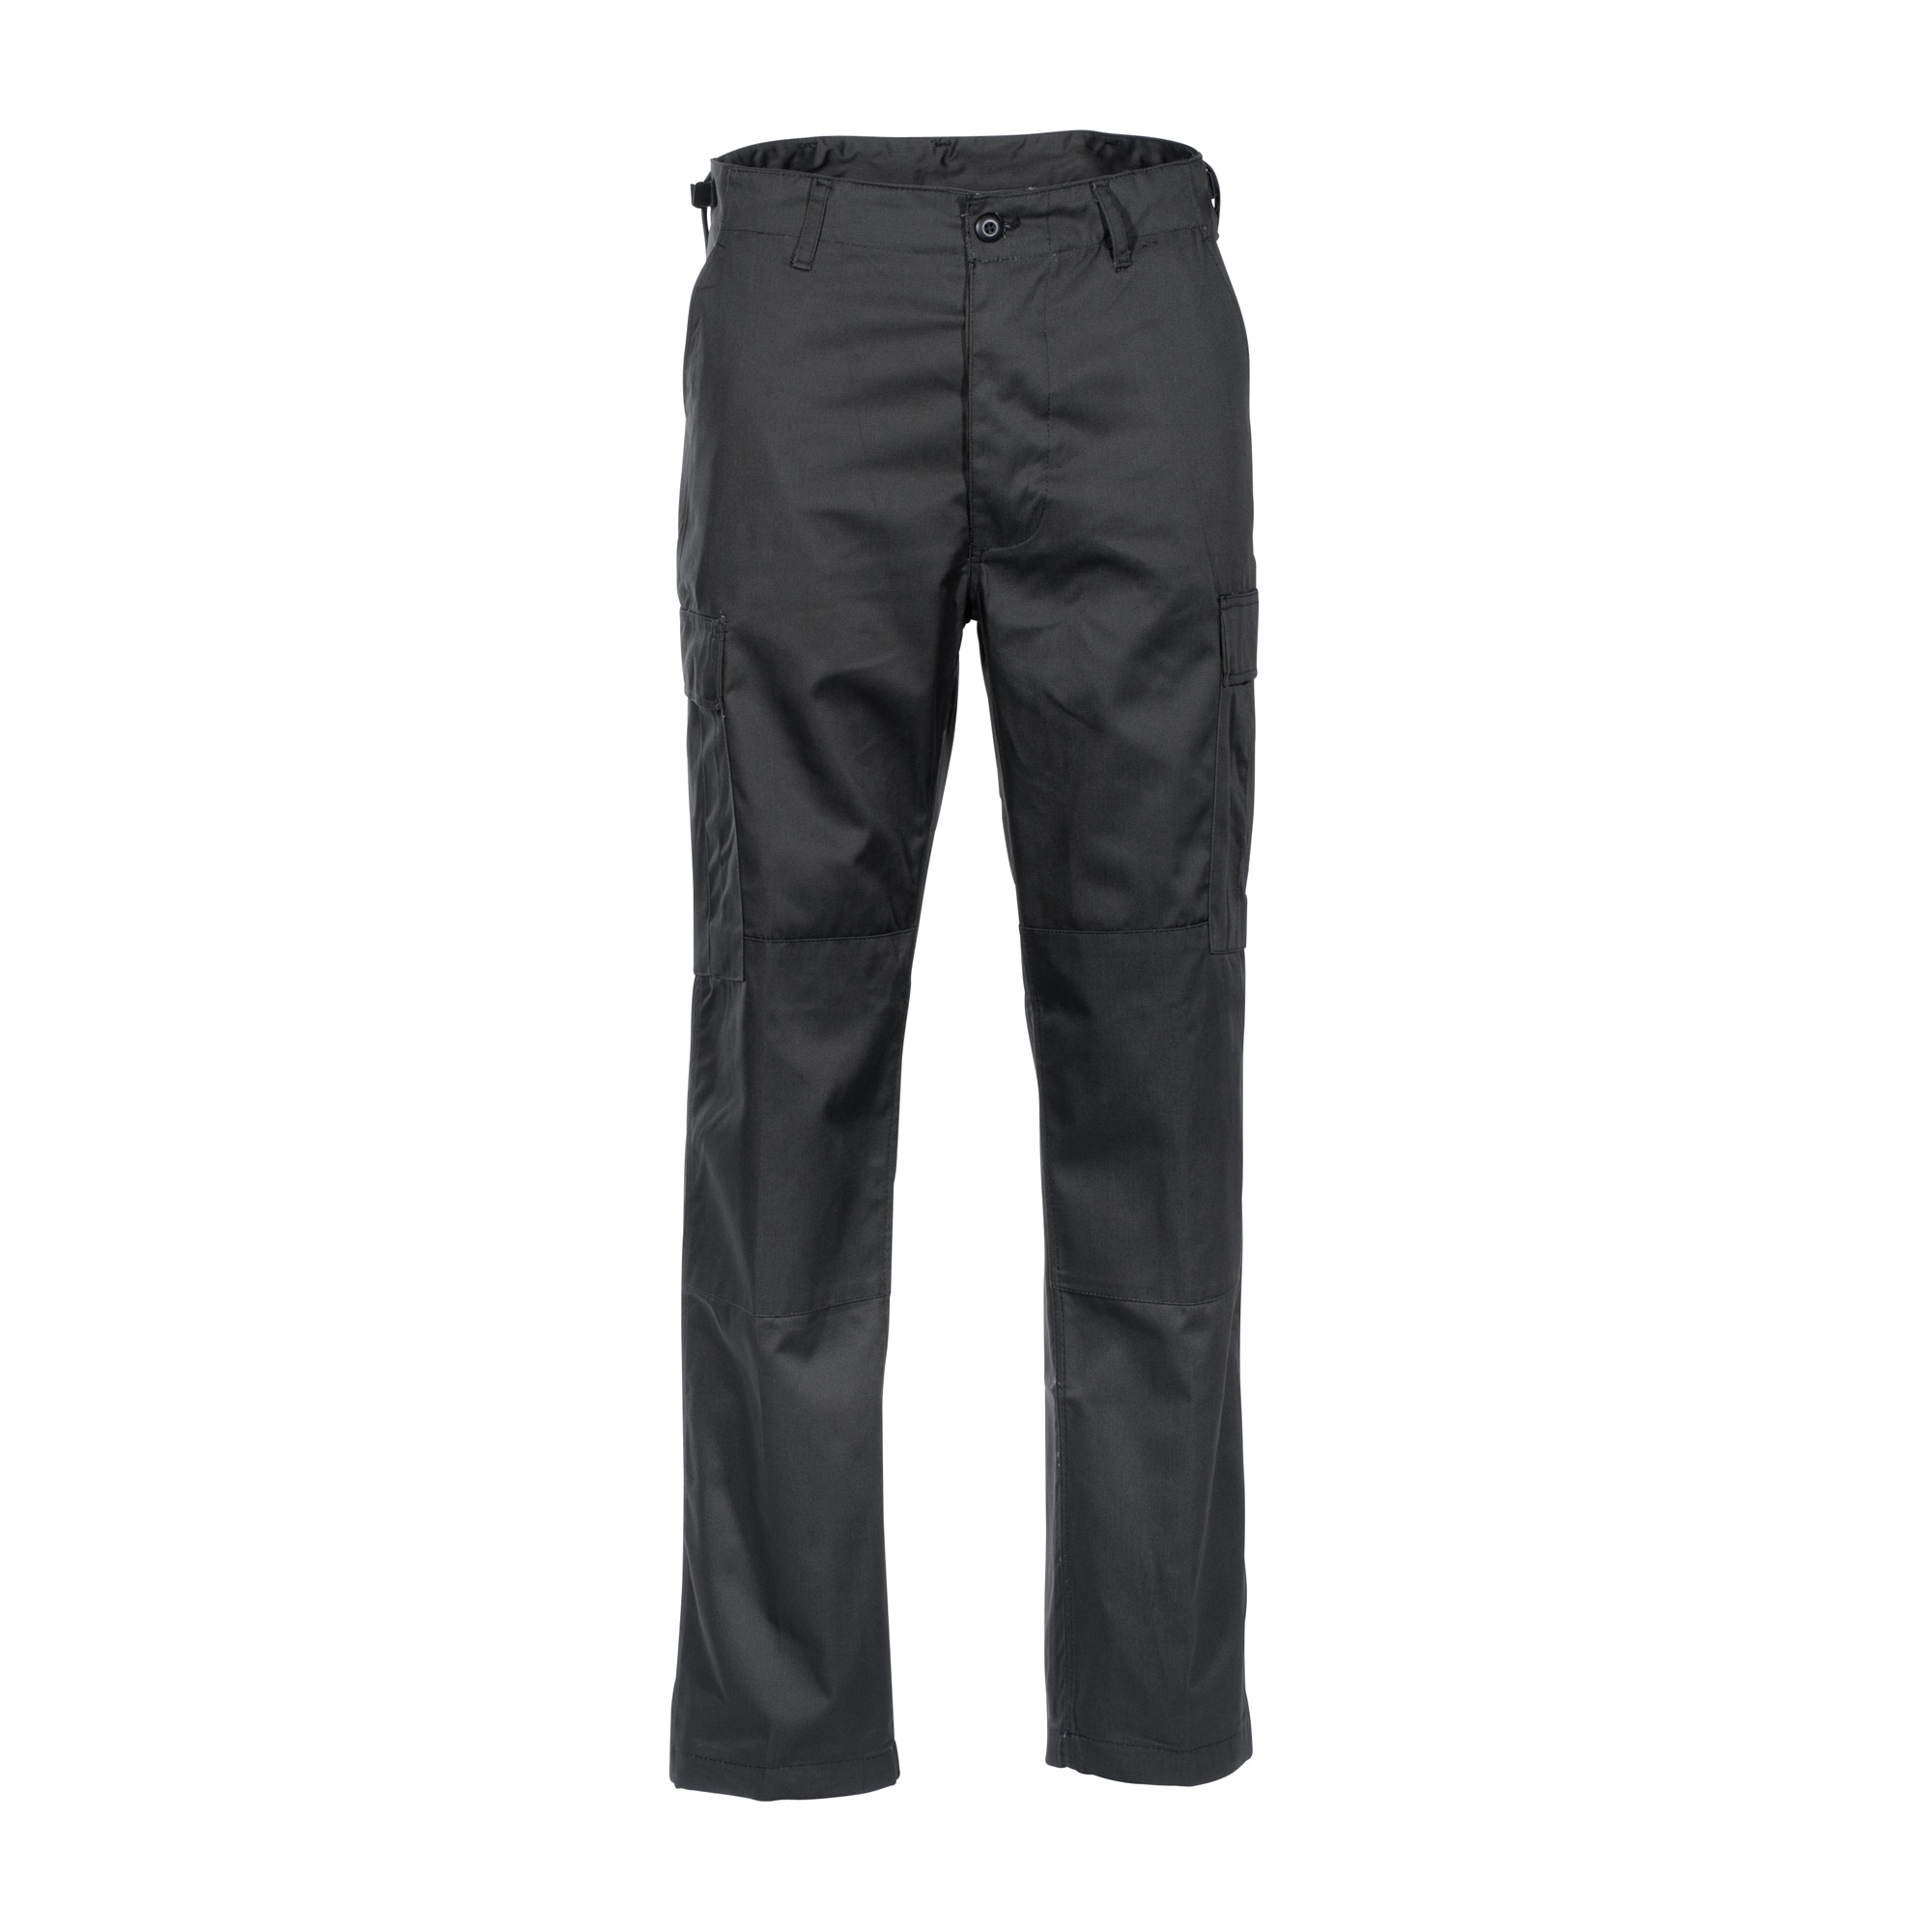 Purchase the Mil-Tec BDU Style Pants black by ASMC